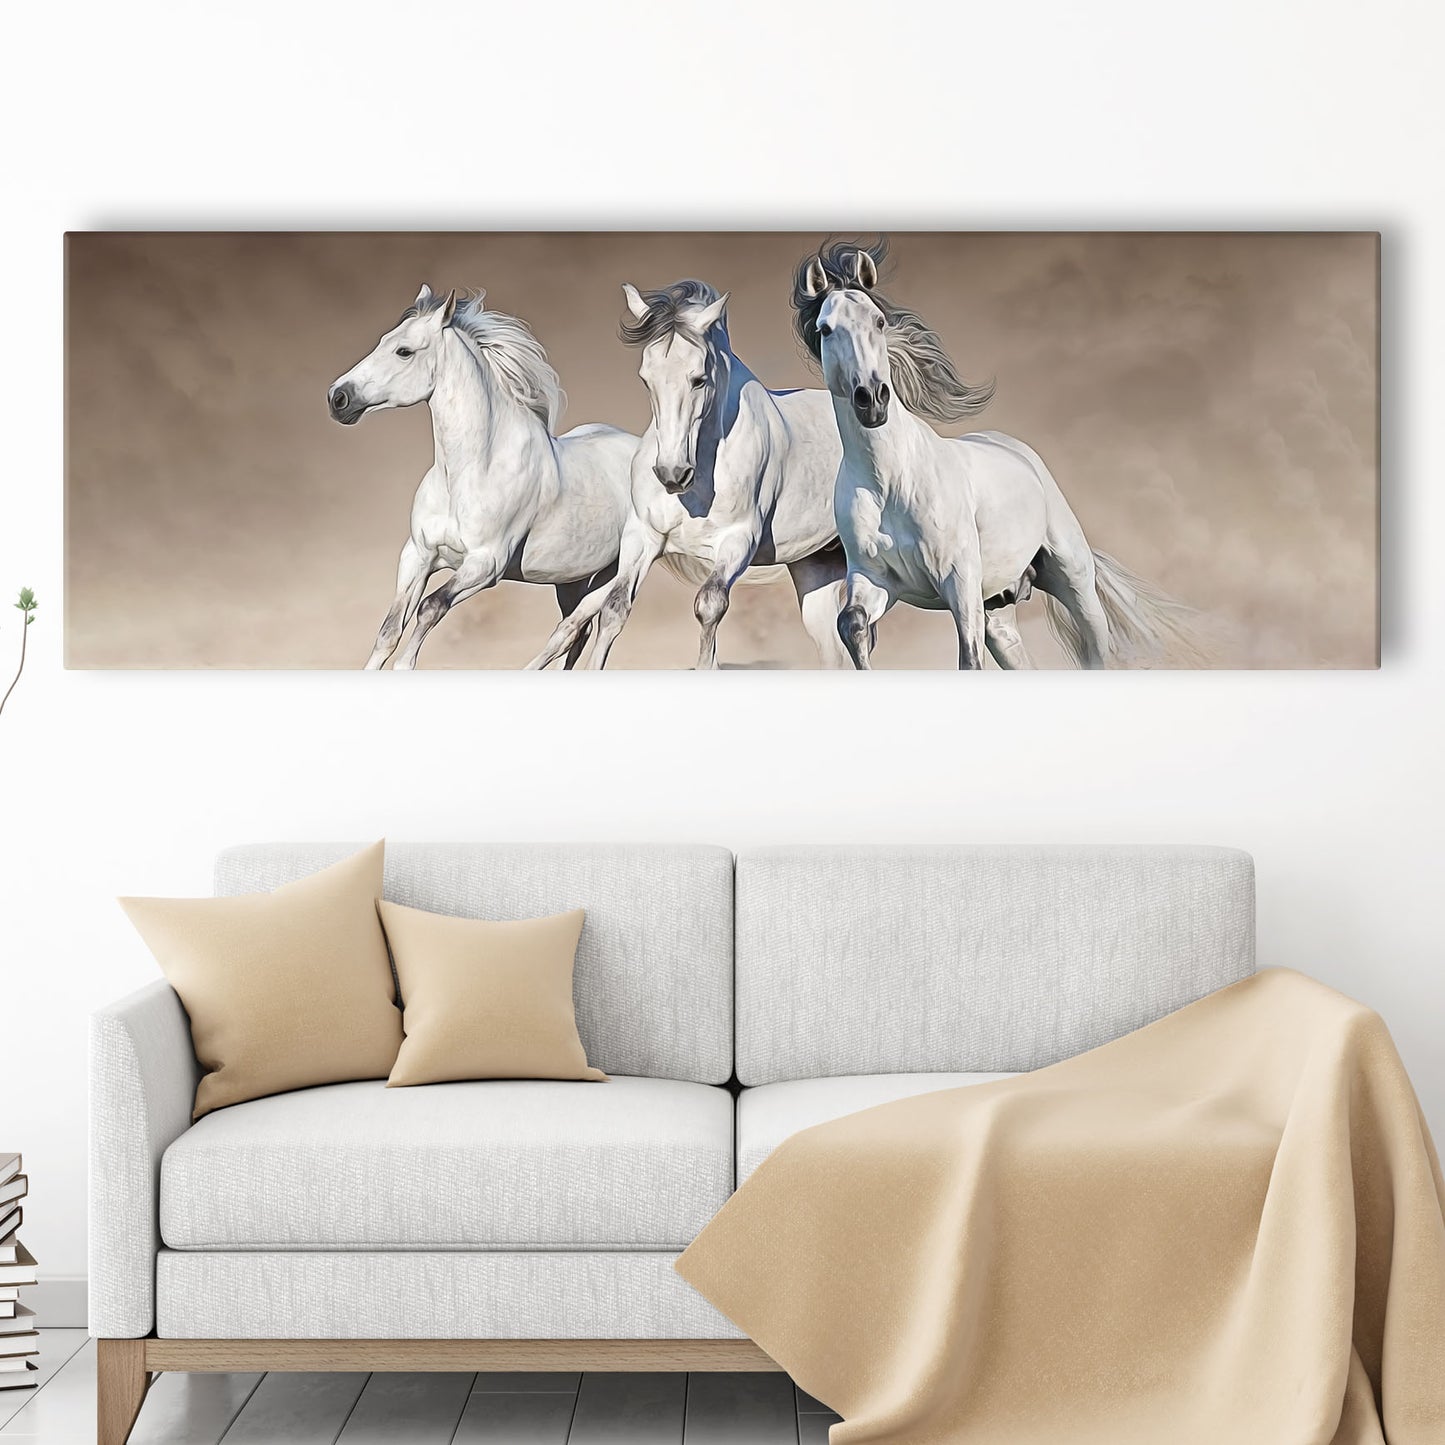 White Horses Running Canvas Wall Art - Image by Tailored Canvases